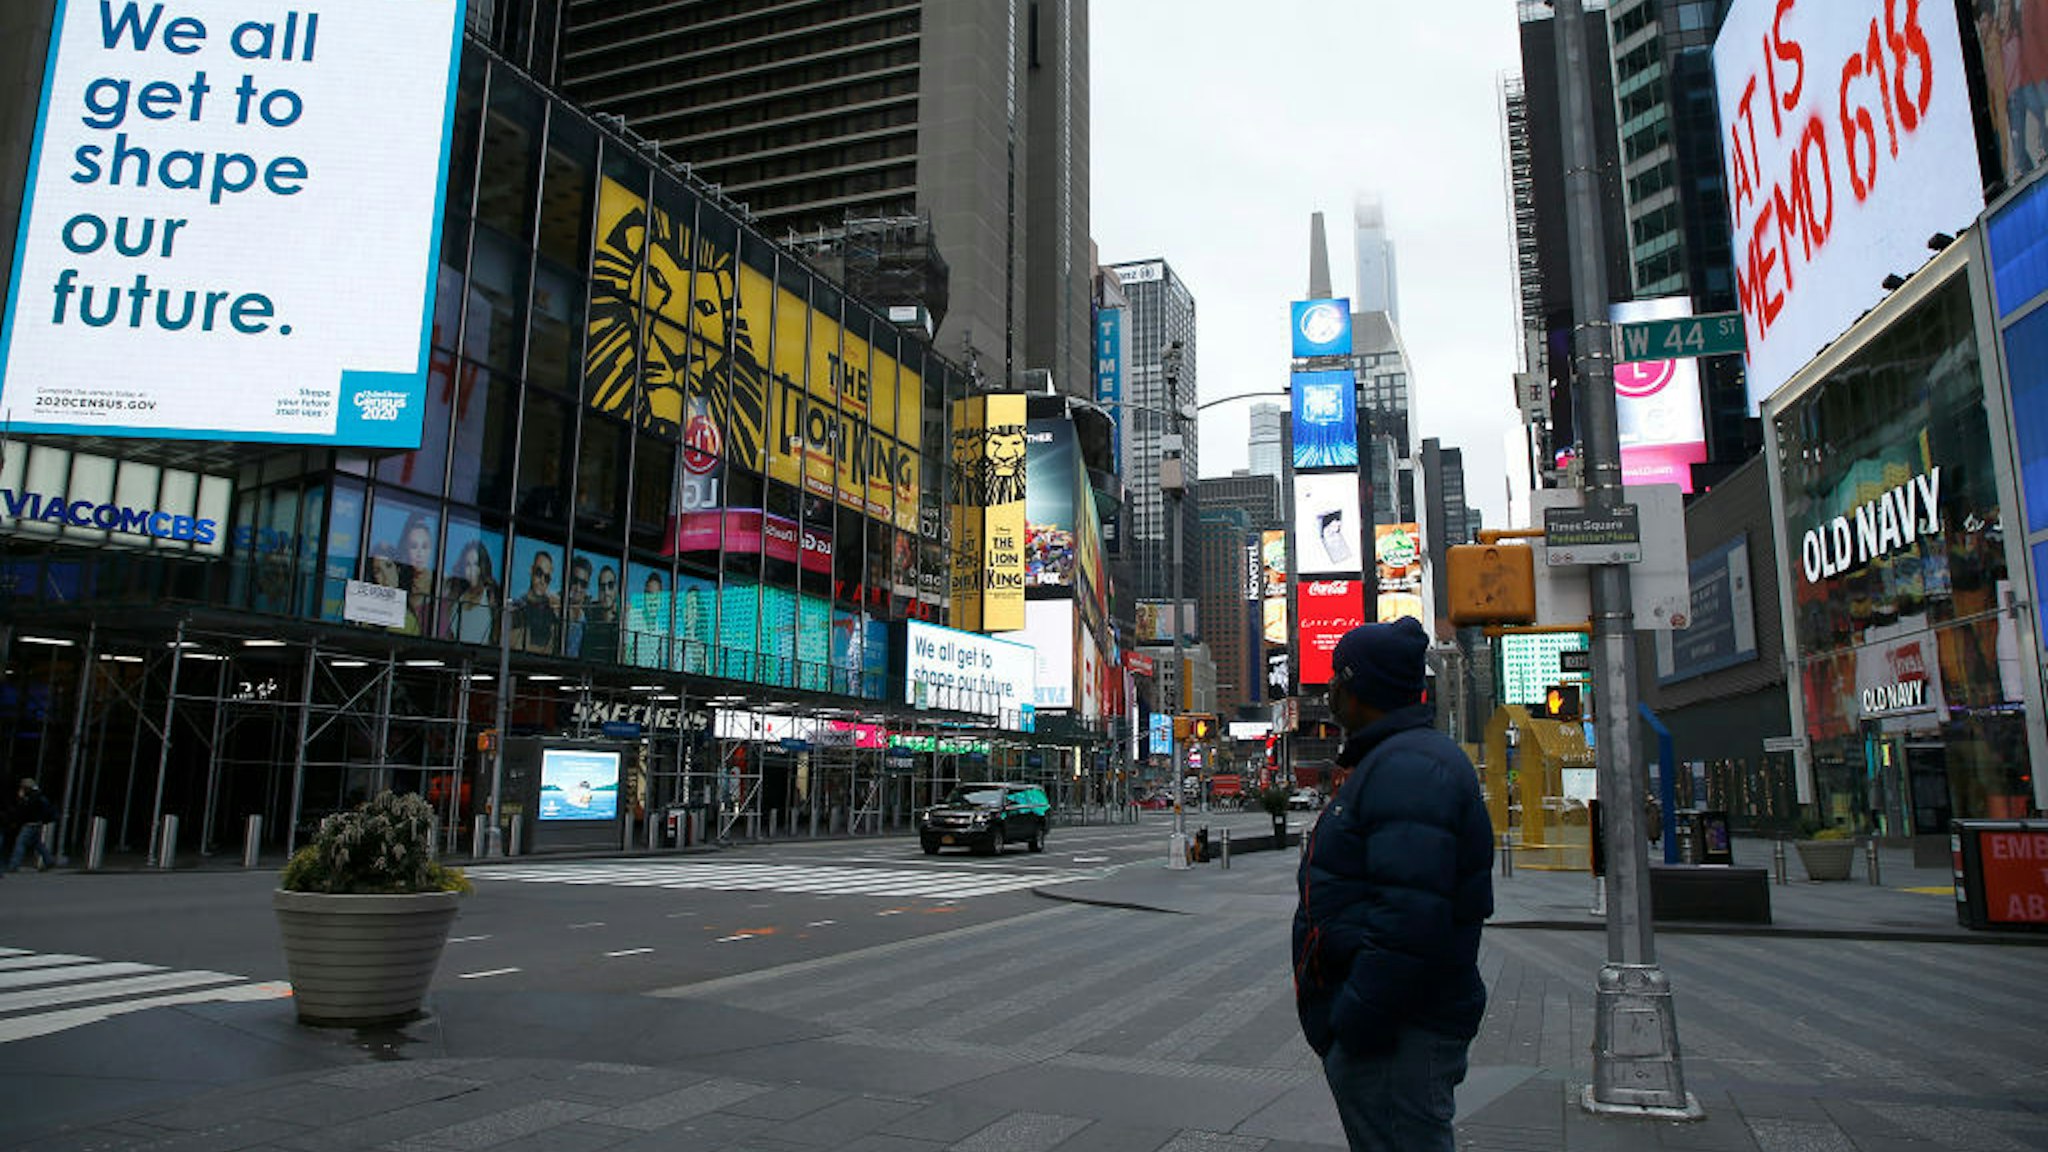 A man takes in the atmosphere in a mostly empty Times Square, New York, US, on March 25, 2020. (Photo by John Lamparski/NurPhoto via Getty Images)